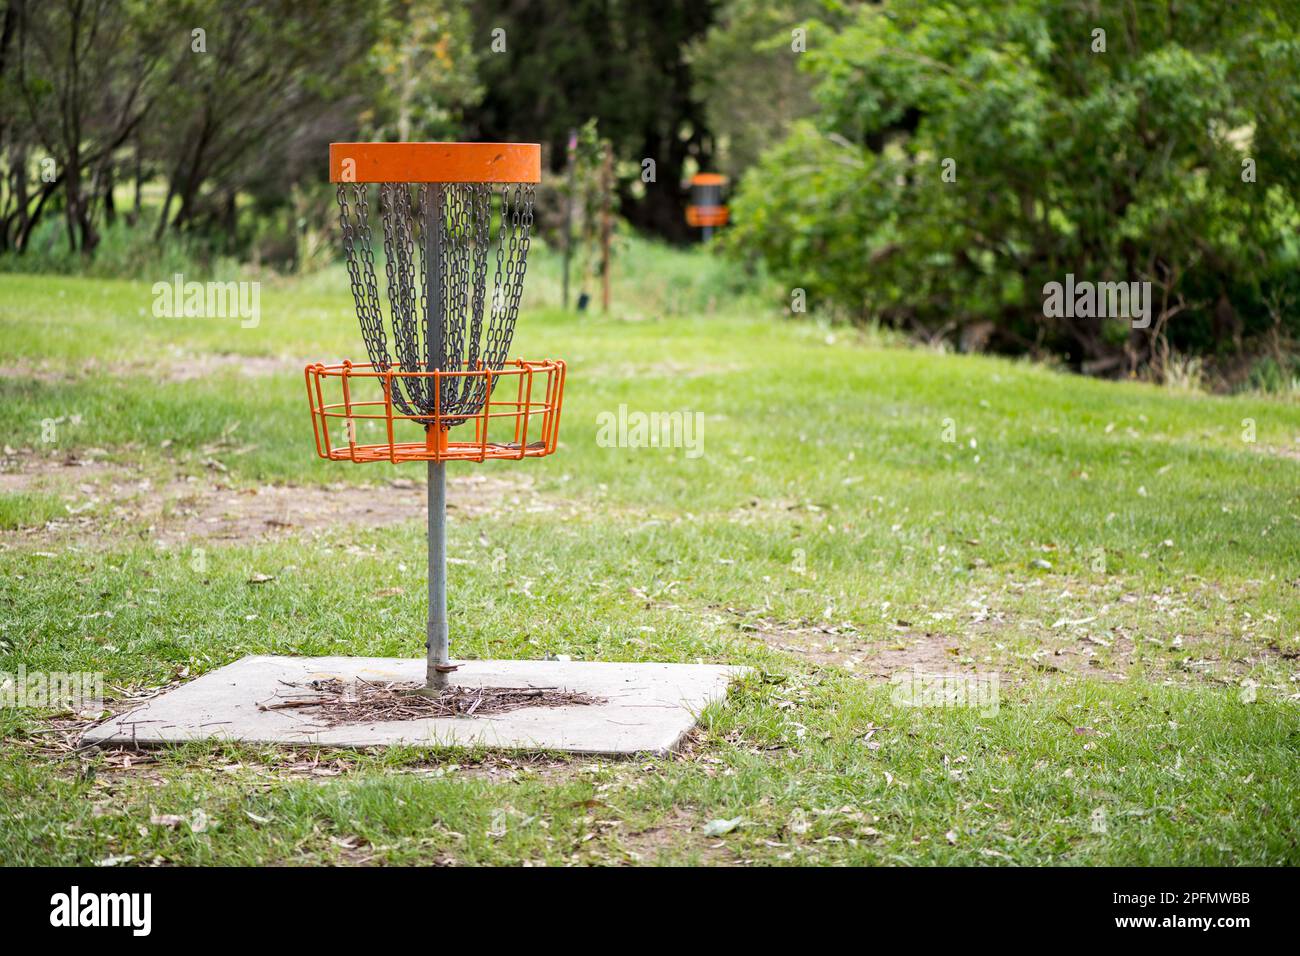 Disc golf (frolf) basket in a park obstacle course with a shallow depth of field Stock Photo